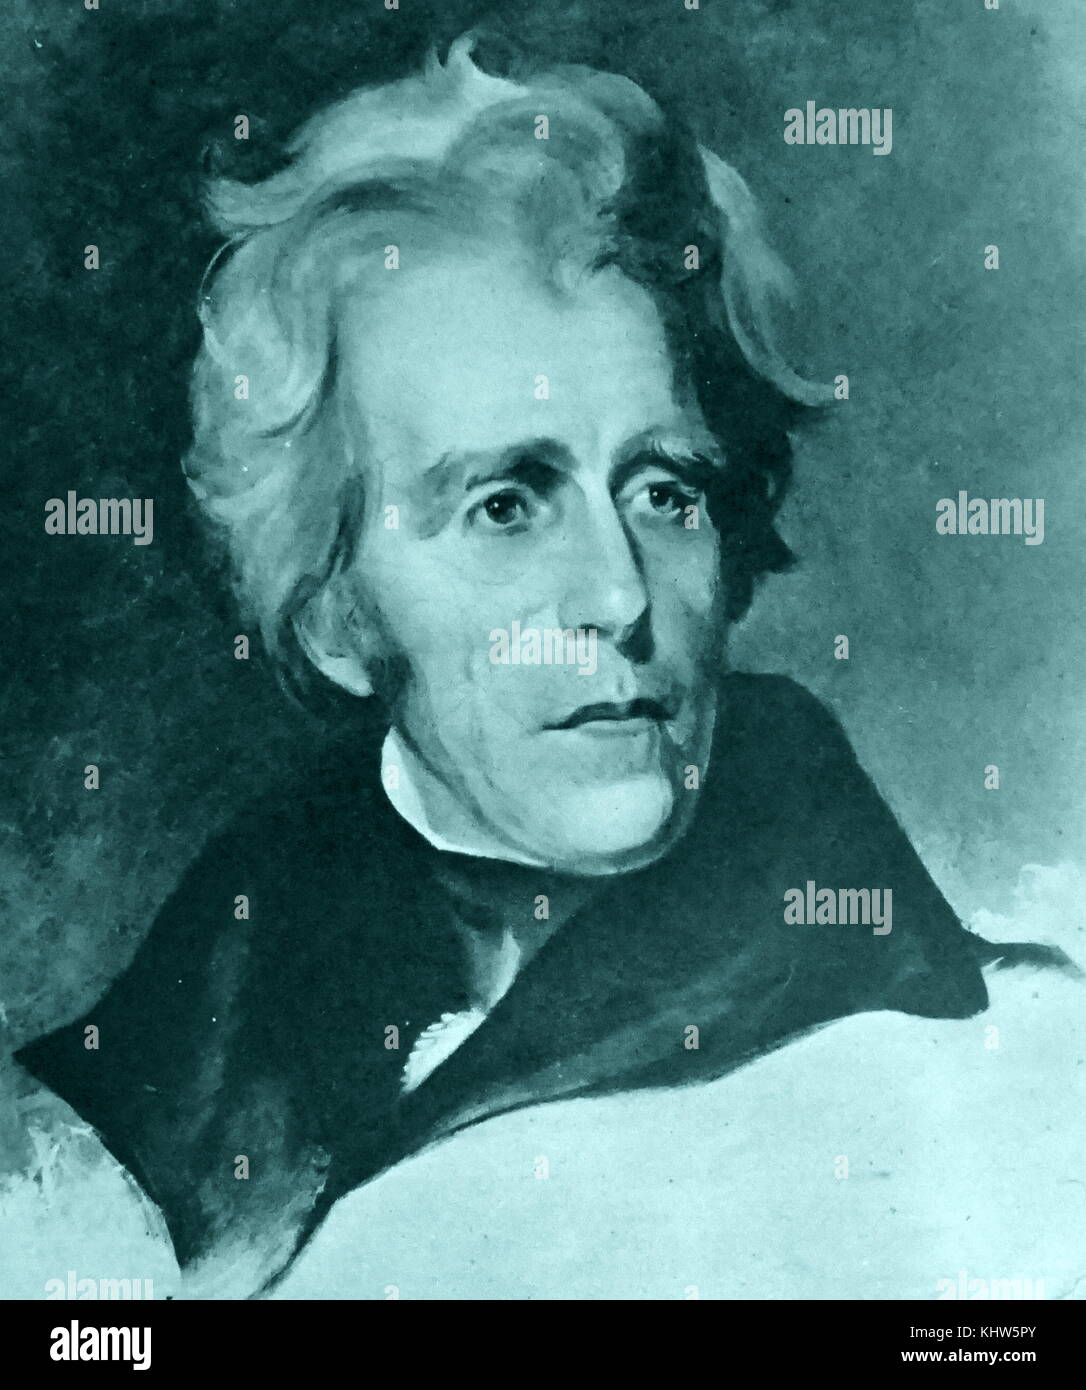 Portrait of President Andrew Jackson by Thomas Sully. Andrew Jackson (767-1845) an American soldier, statesman and seventh President of the United States of America. Painted by Thomas Sully (1783-1872) an American portrait painter. Dated 19th Century Stock Photo